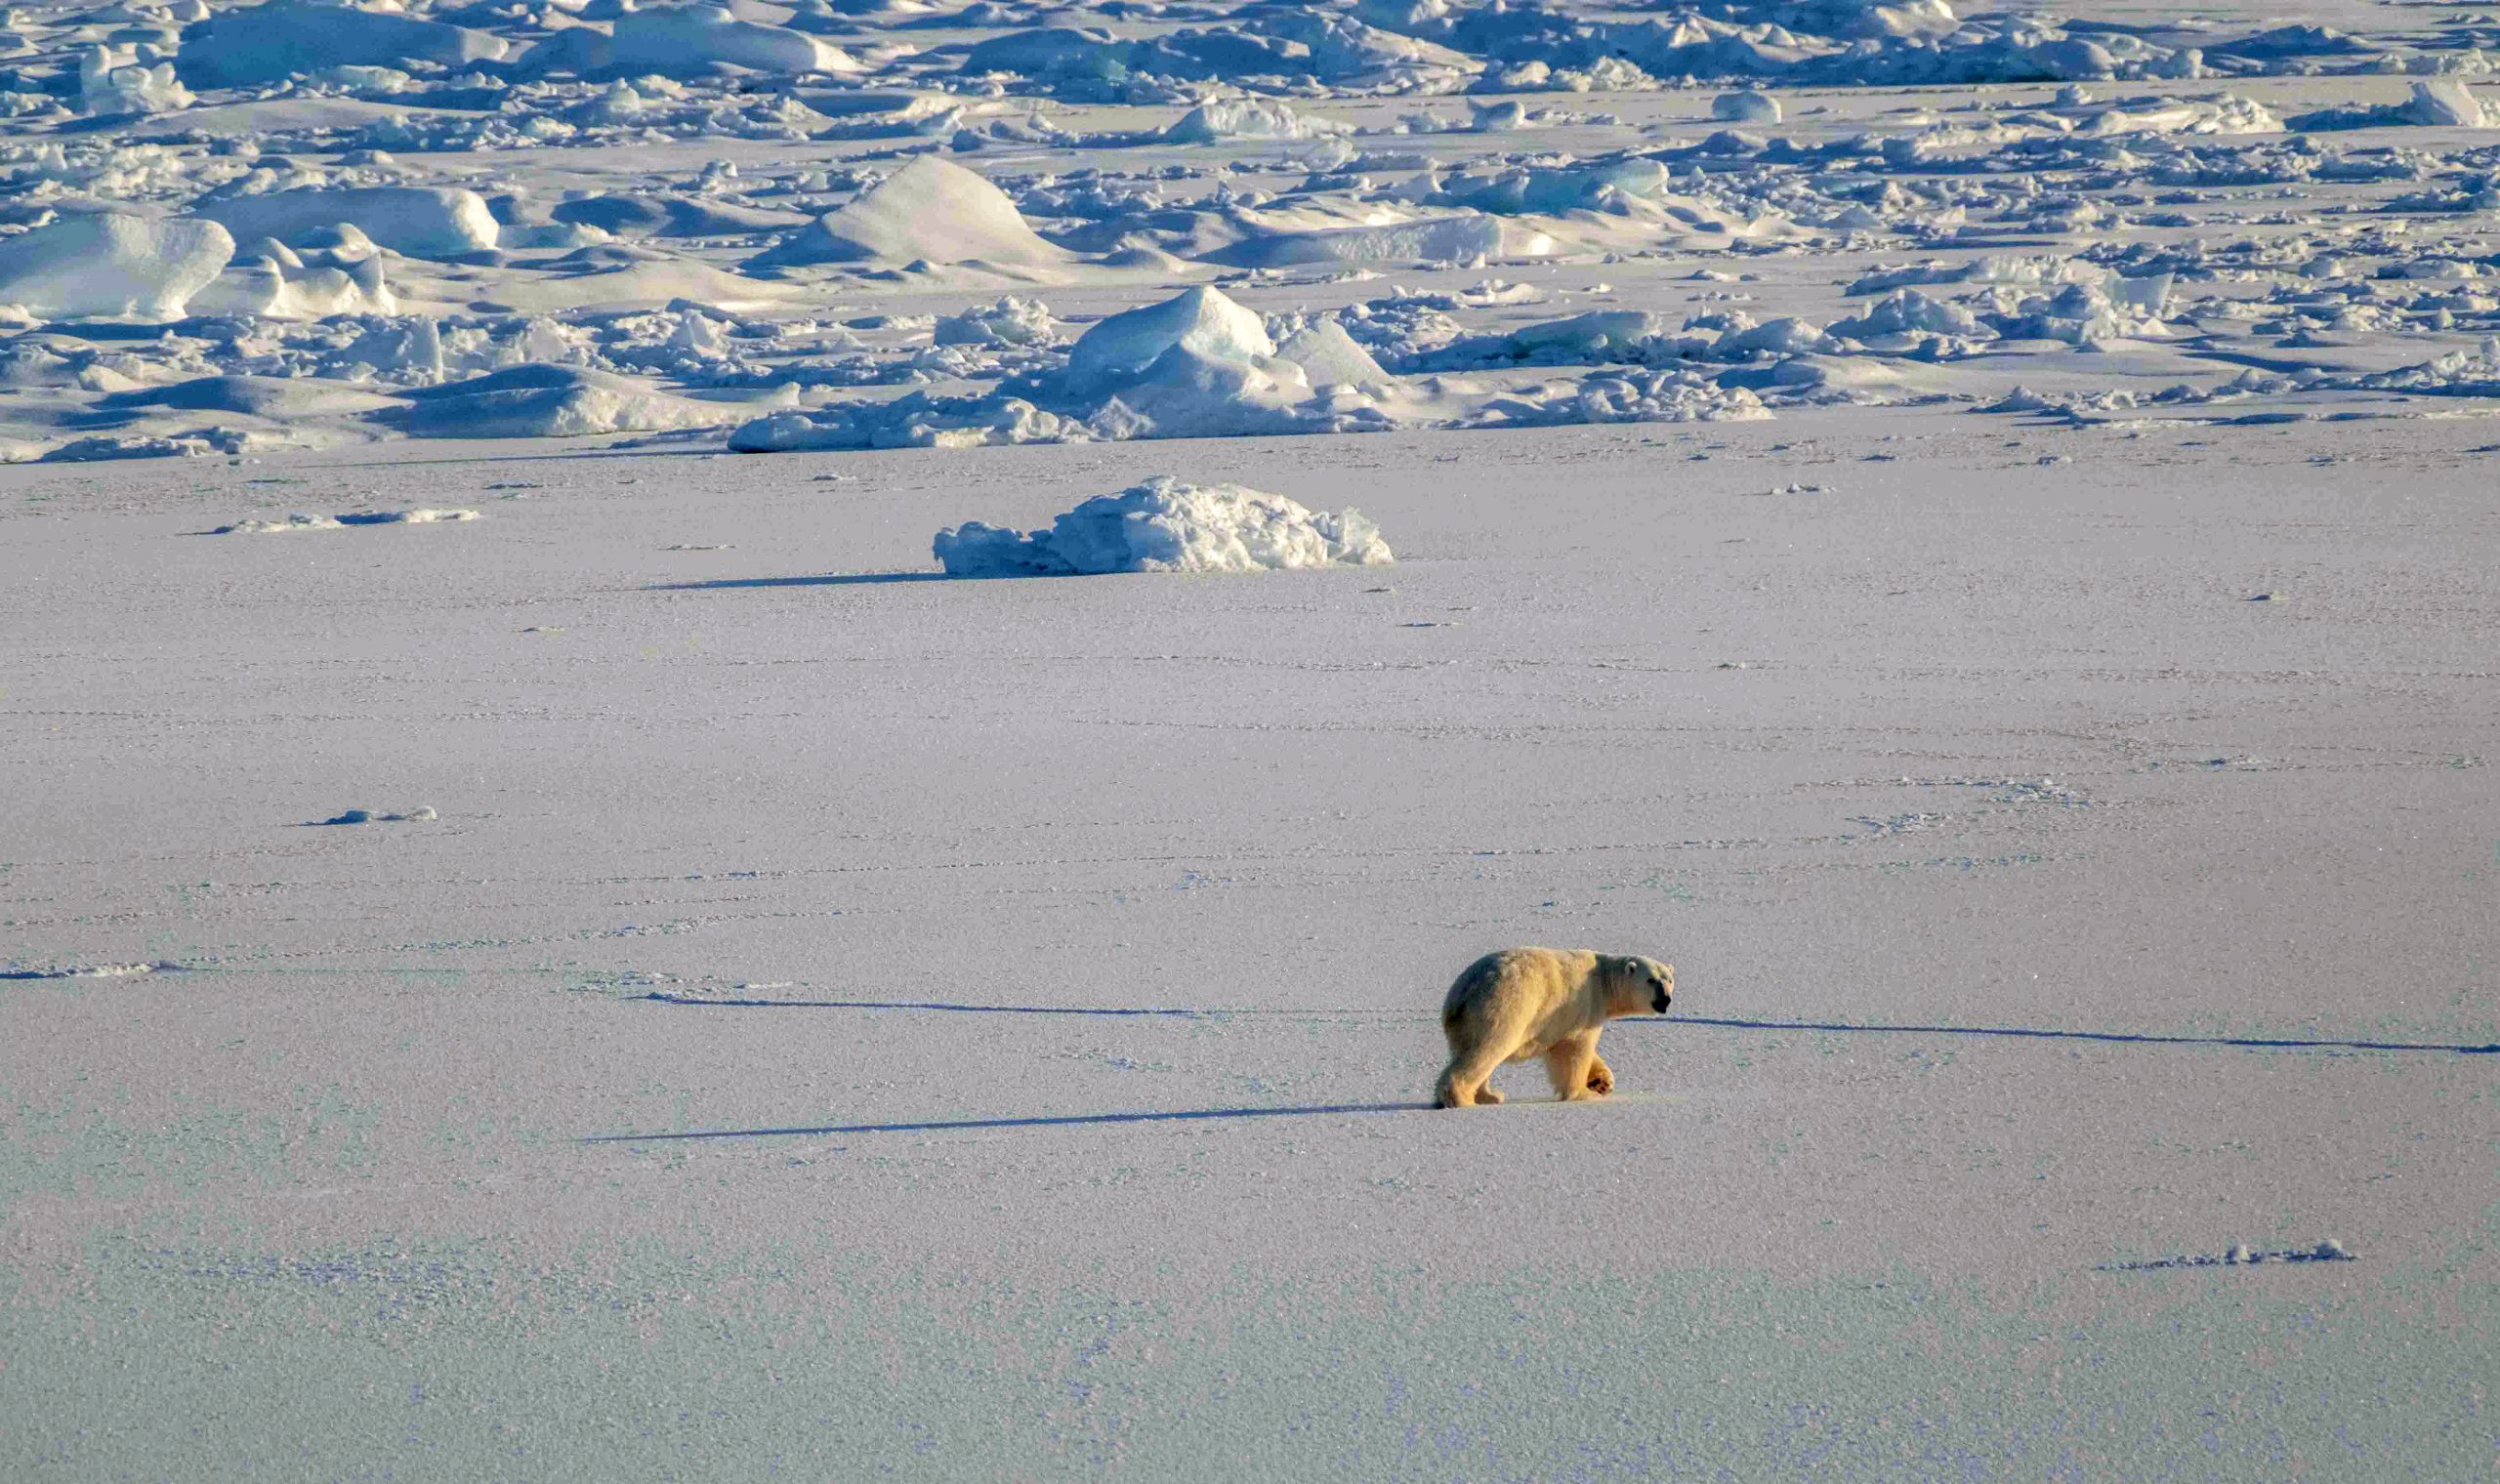 The first polar bear we've seen this expedition (Photo by Elizabeth Bailey)!